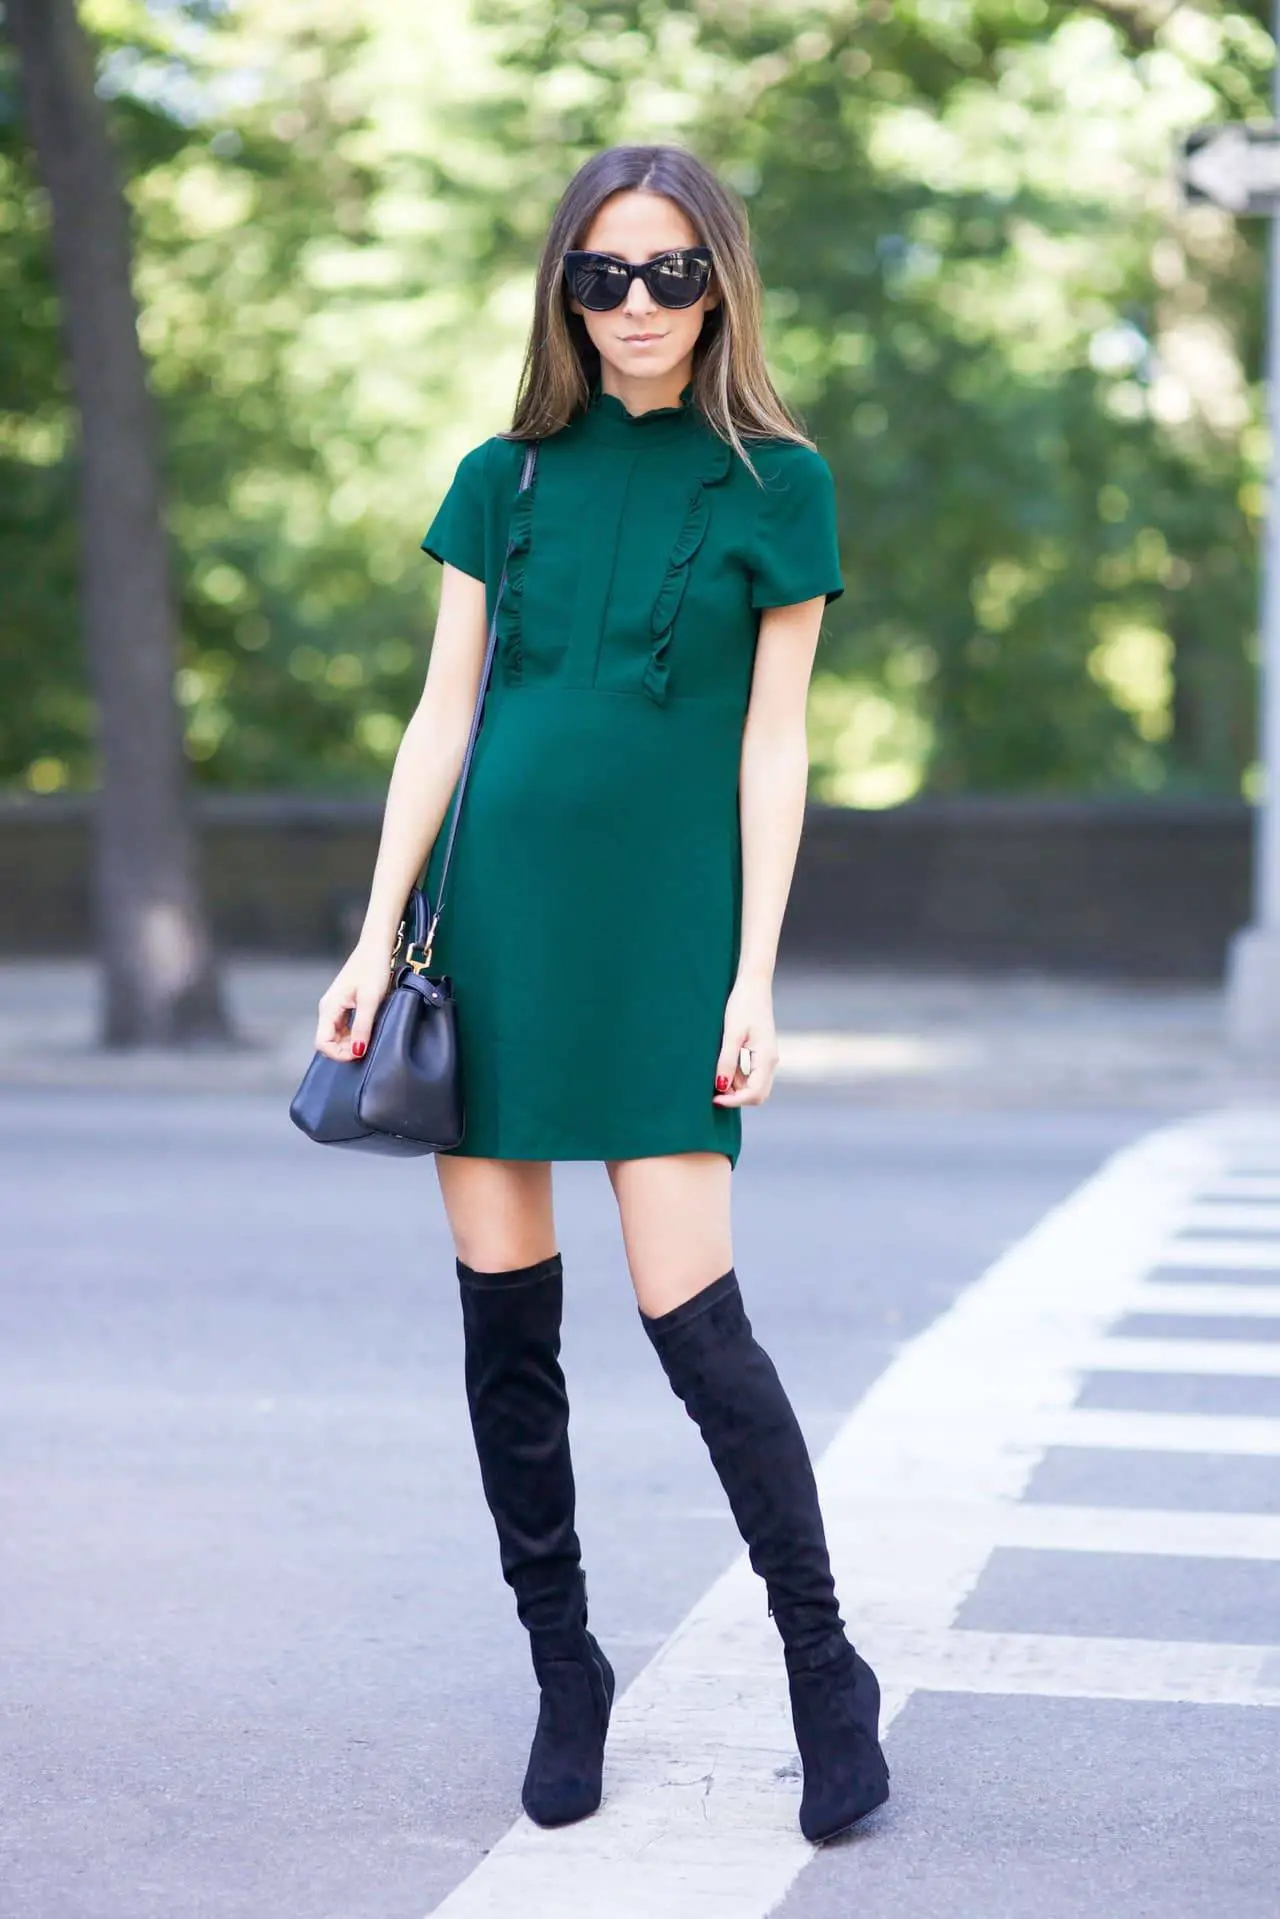 7 Stunning Ways To Rock In Thigh High Boots In Everyday Outfits